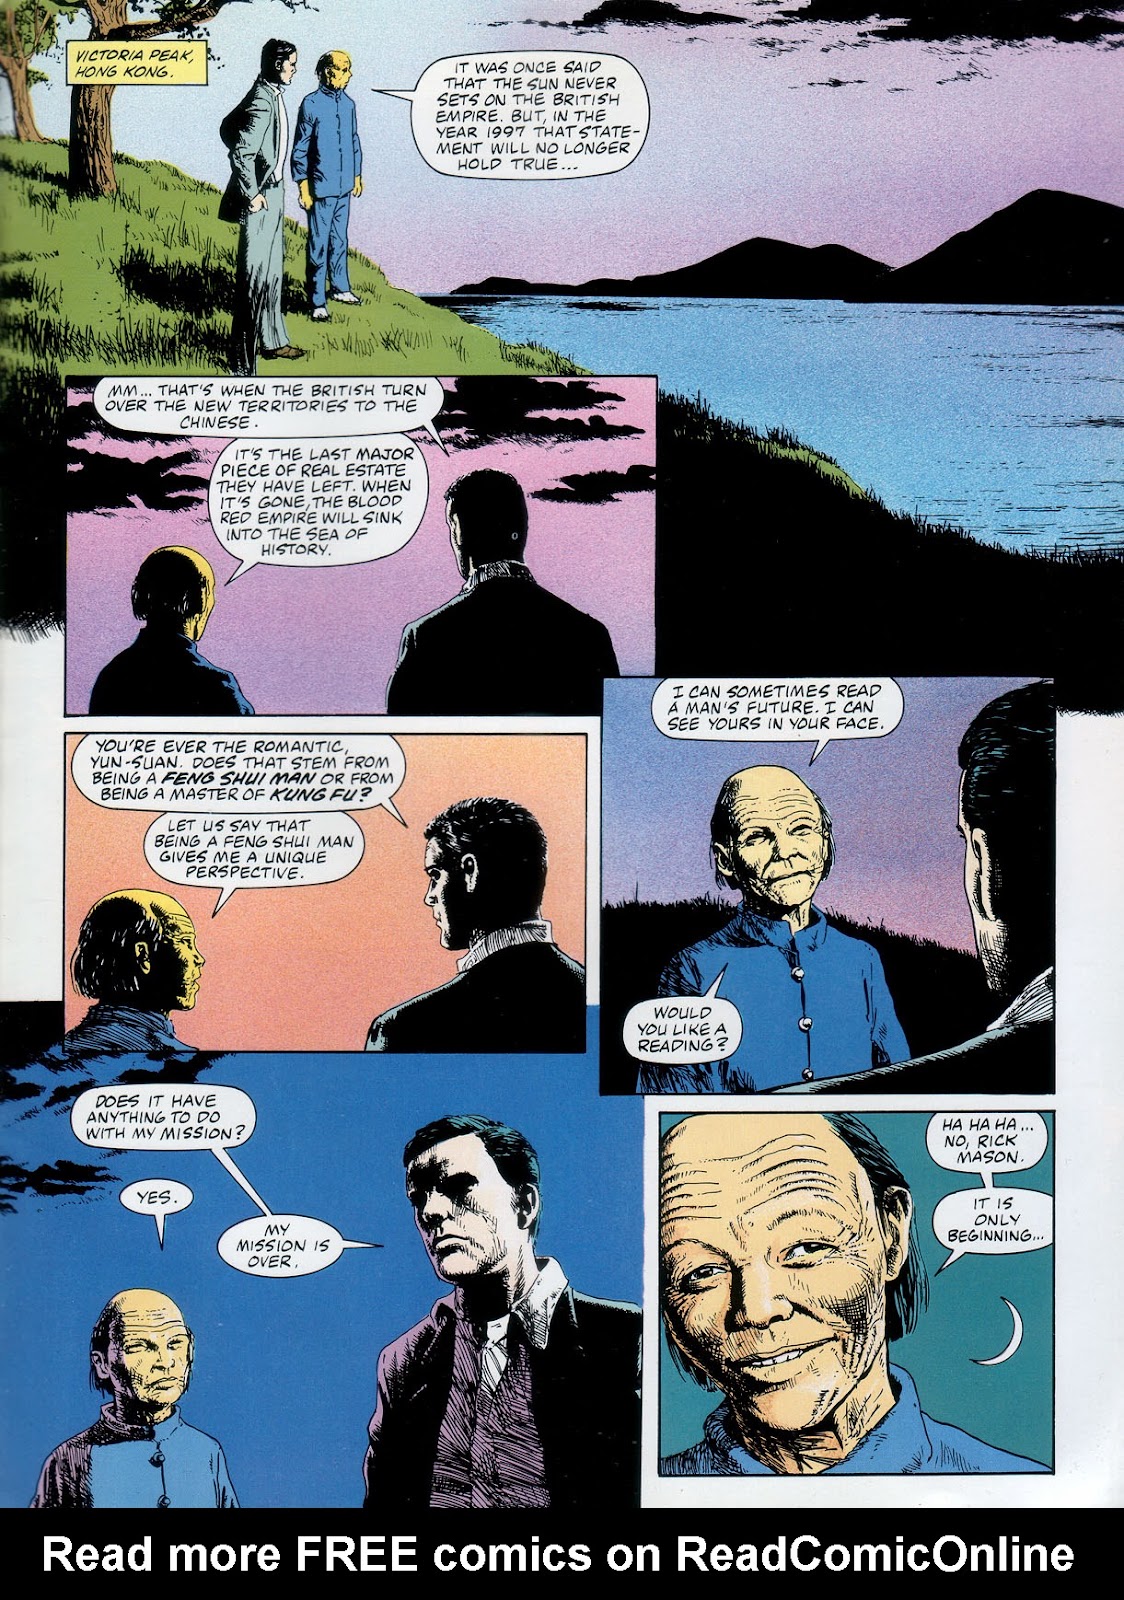 Marvel Graphic Novel issue 57 - Rick Mason - The Agent - Page 7